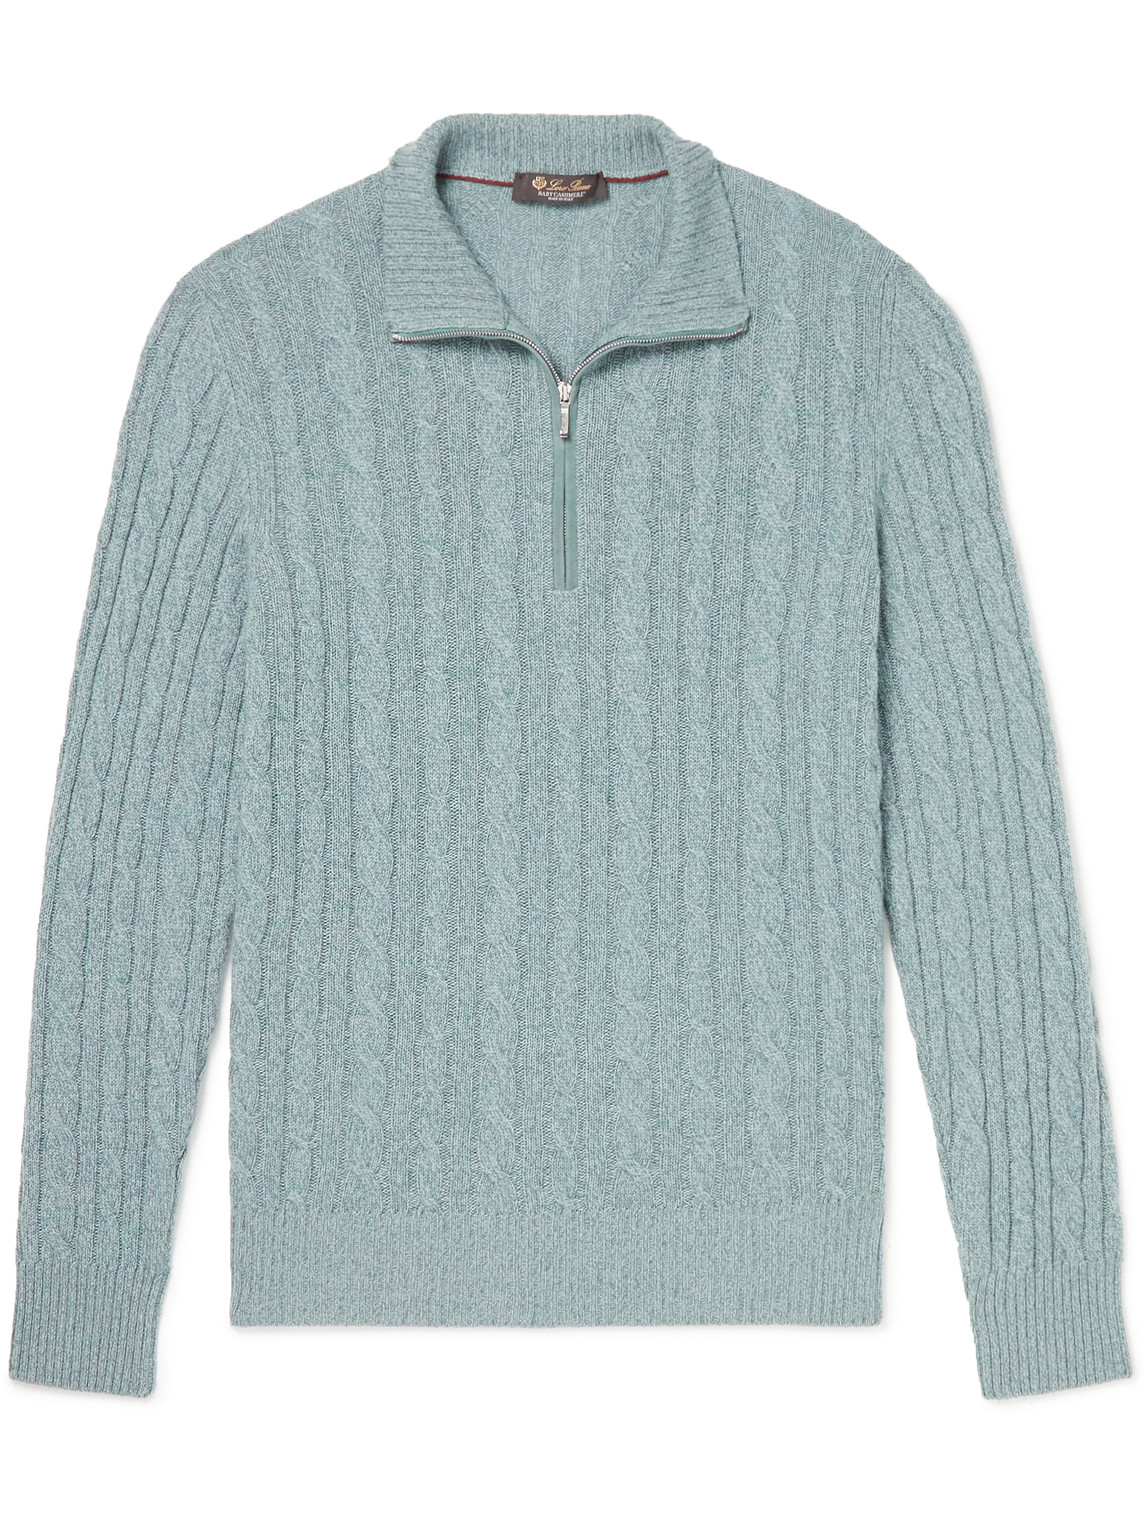 LORO PIANA SUEDE-TRIMMED CABLE-KNIT BABY CASHMERE HALF-ZIP SWEATER